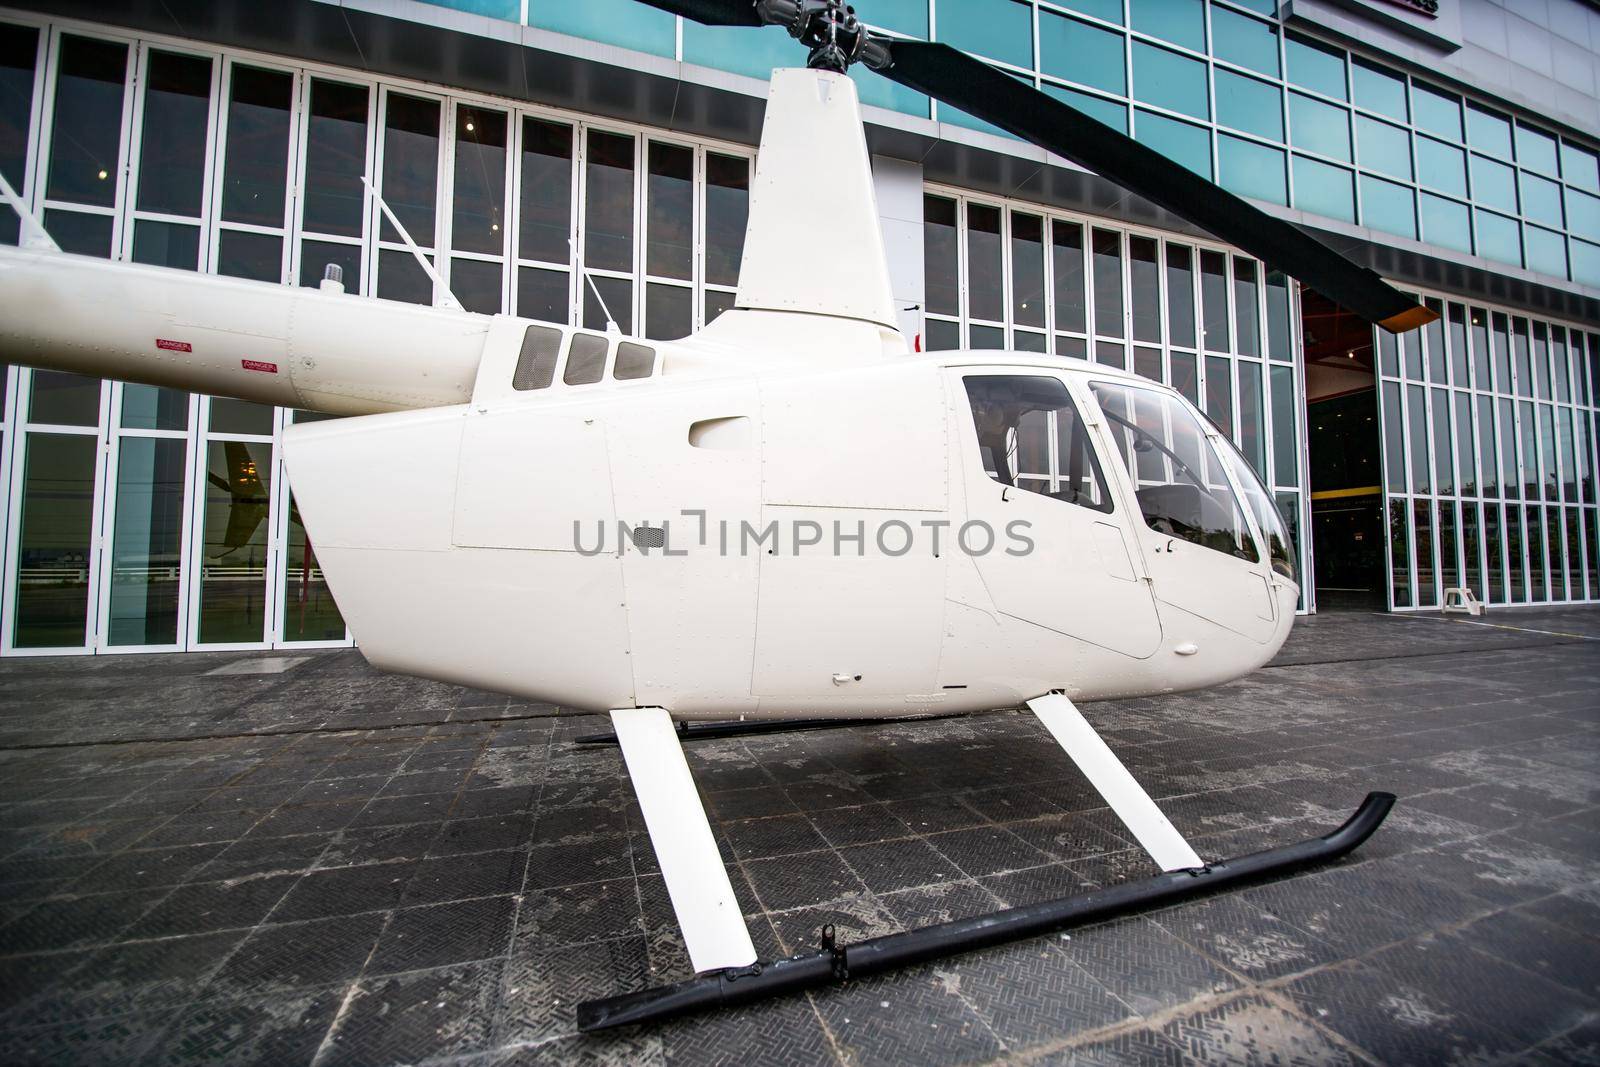 private commercial Helicopter parking by airport terminal